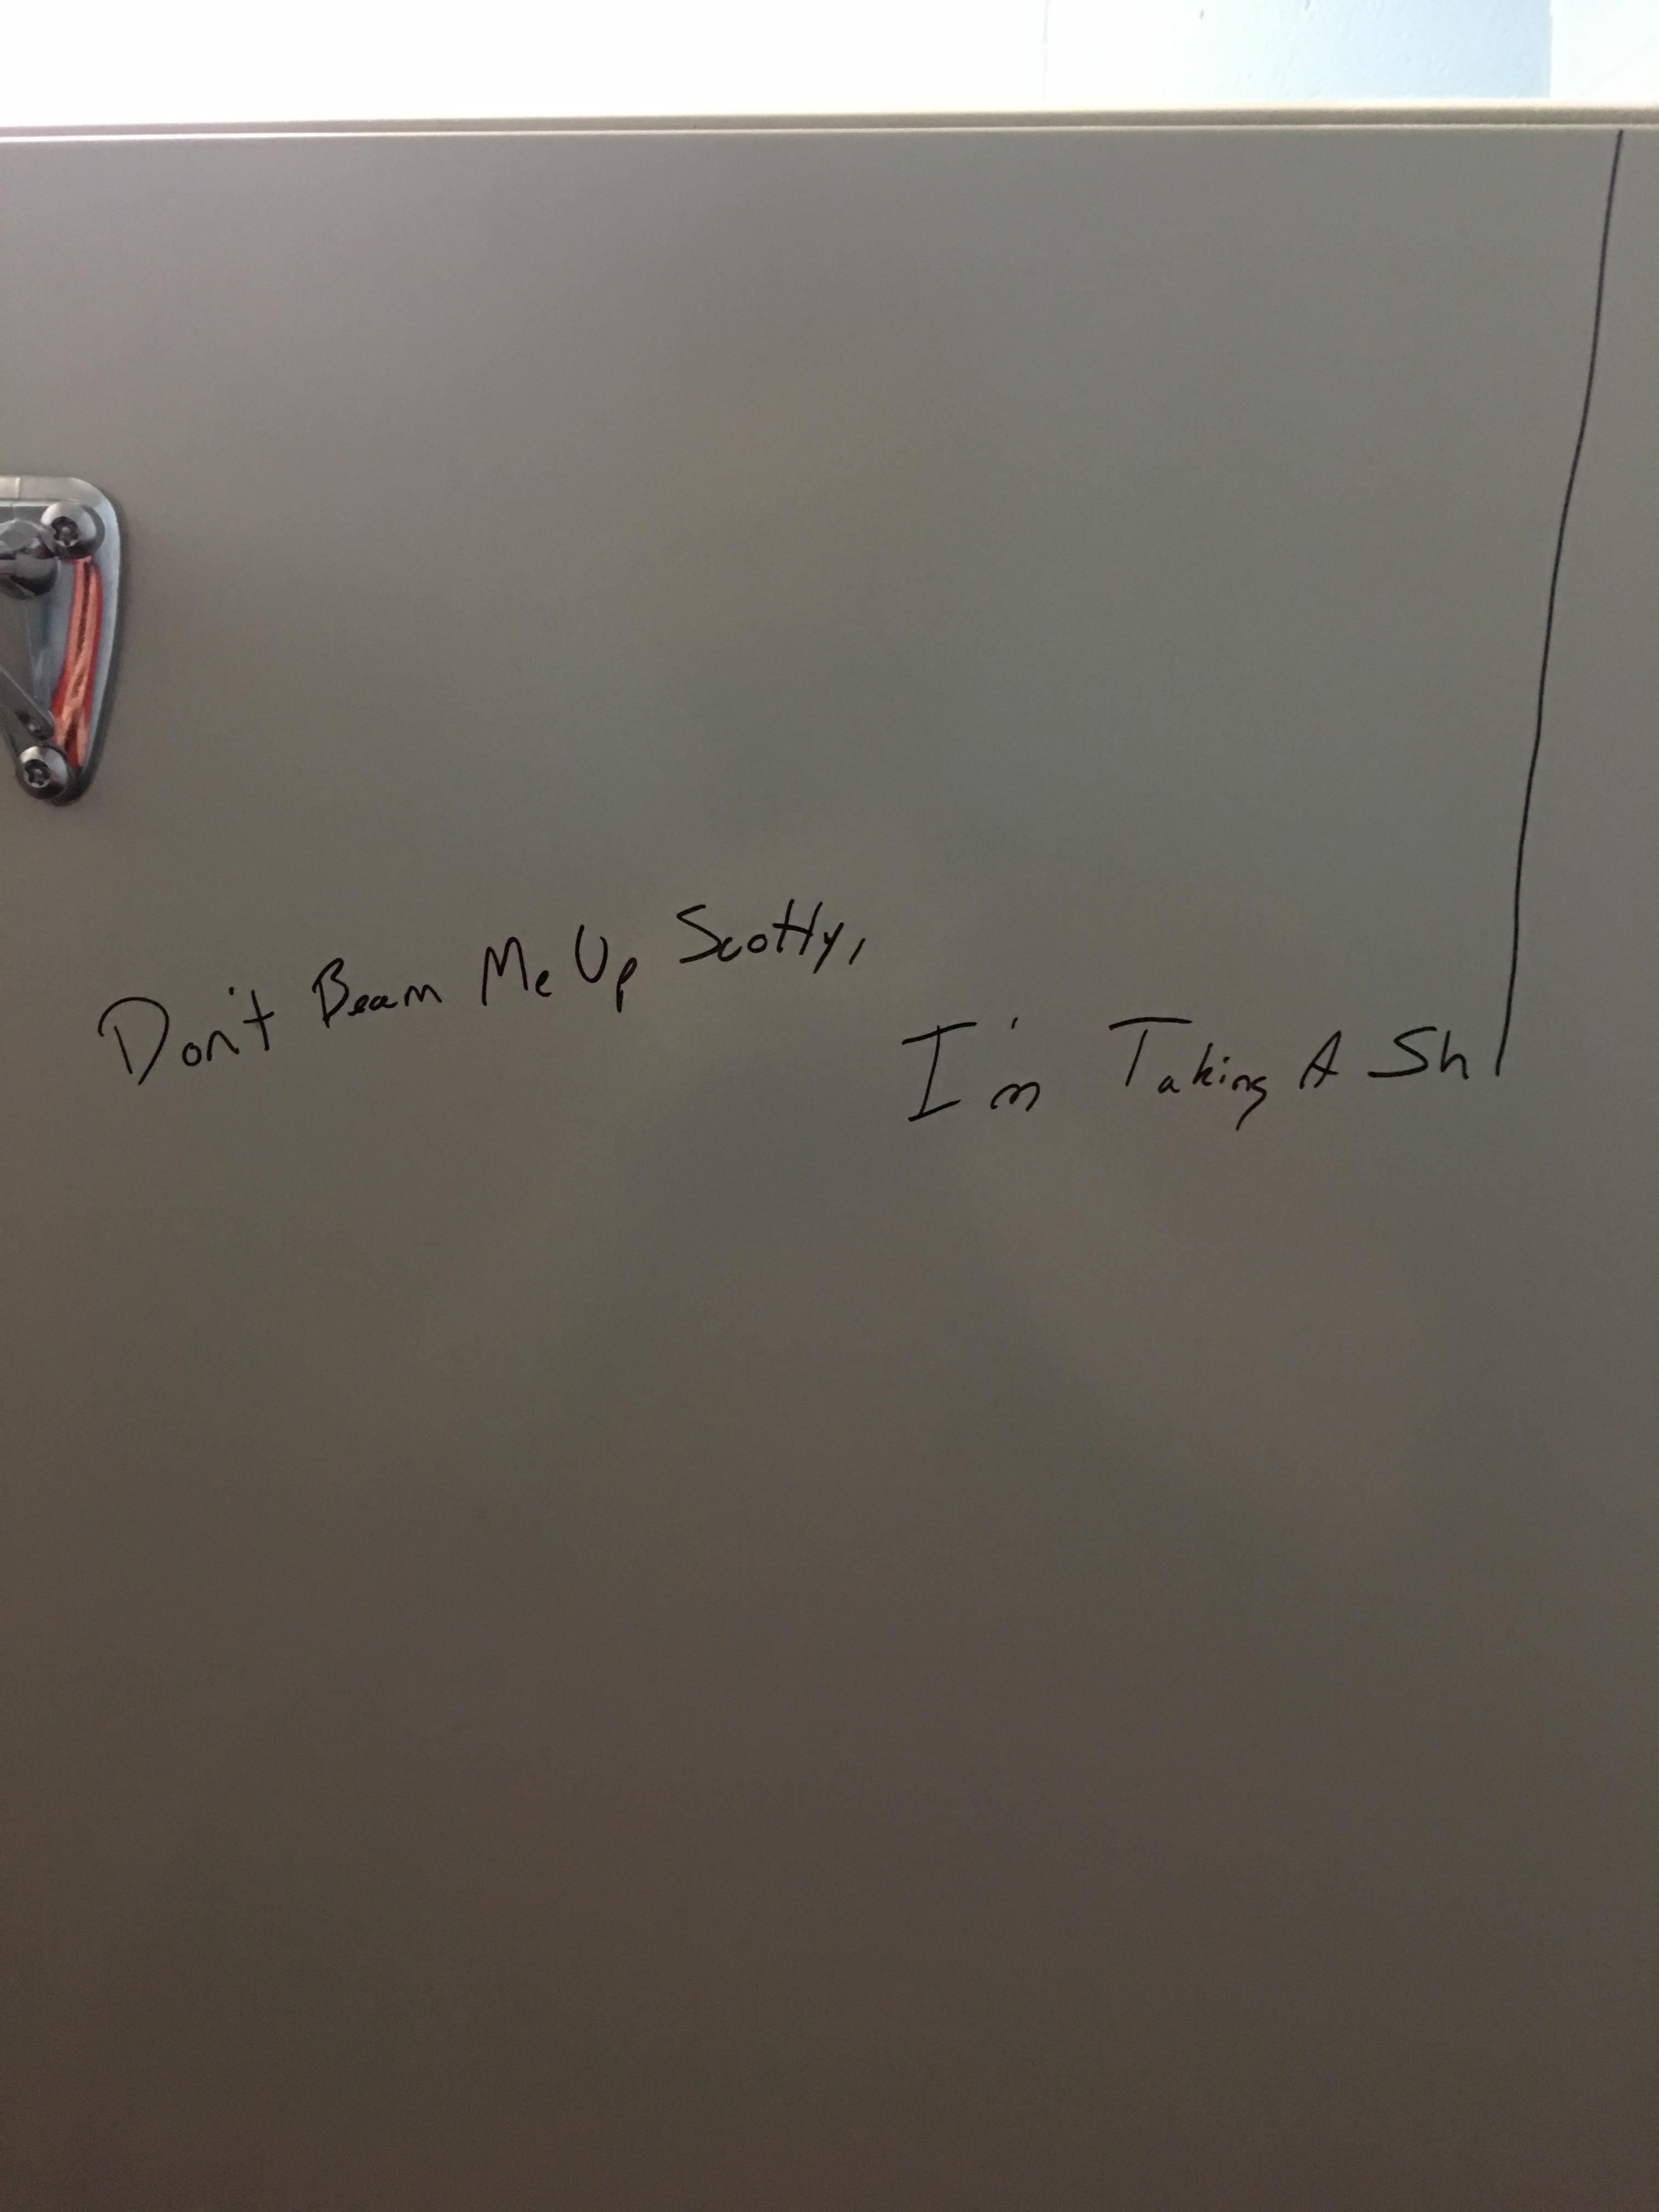 Found this in the bathroom stall at work.